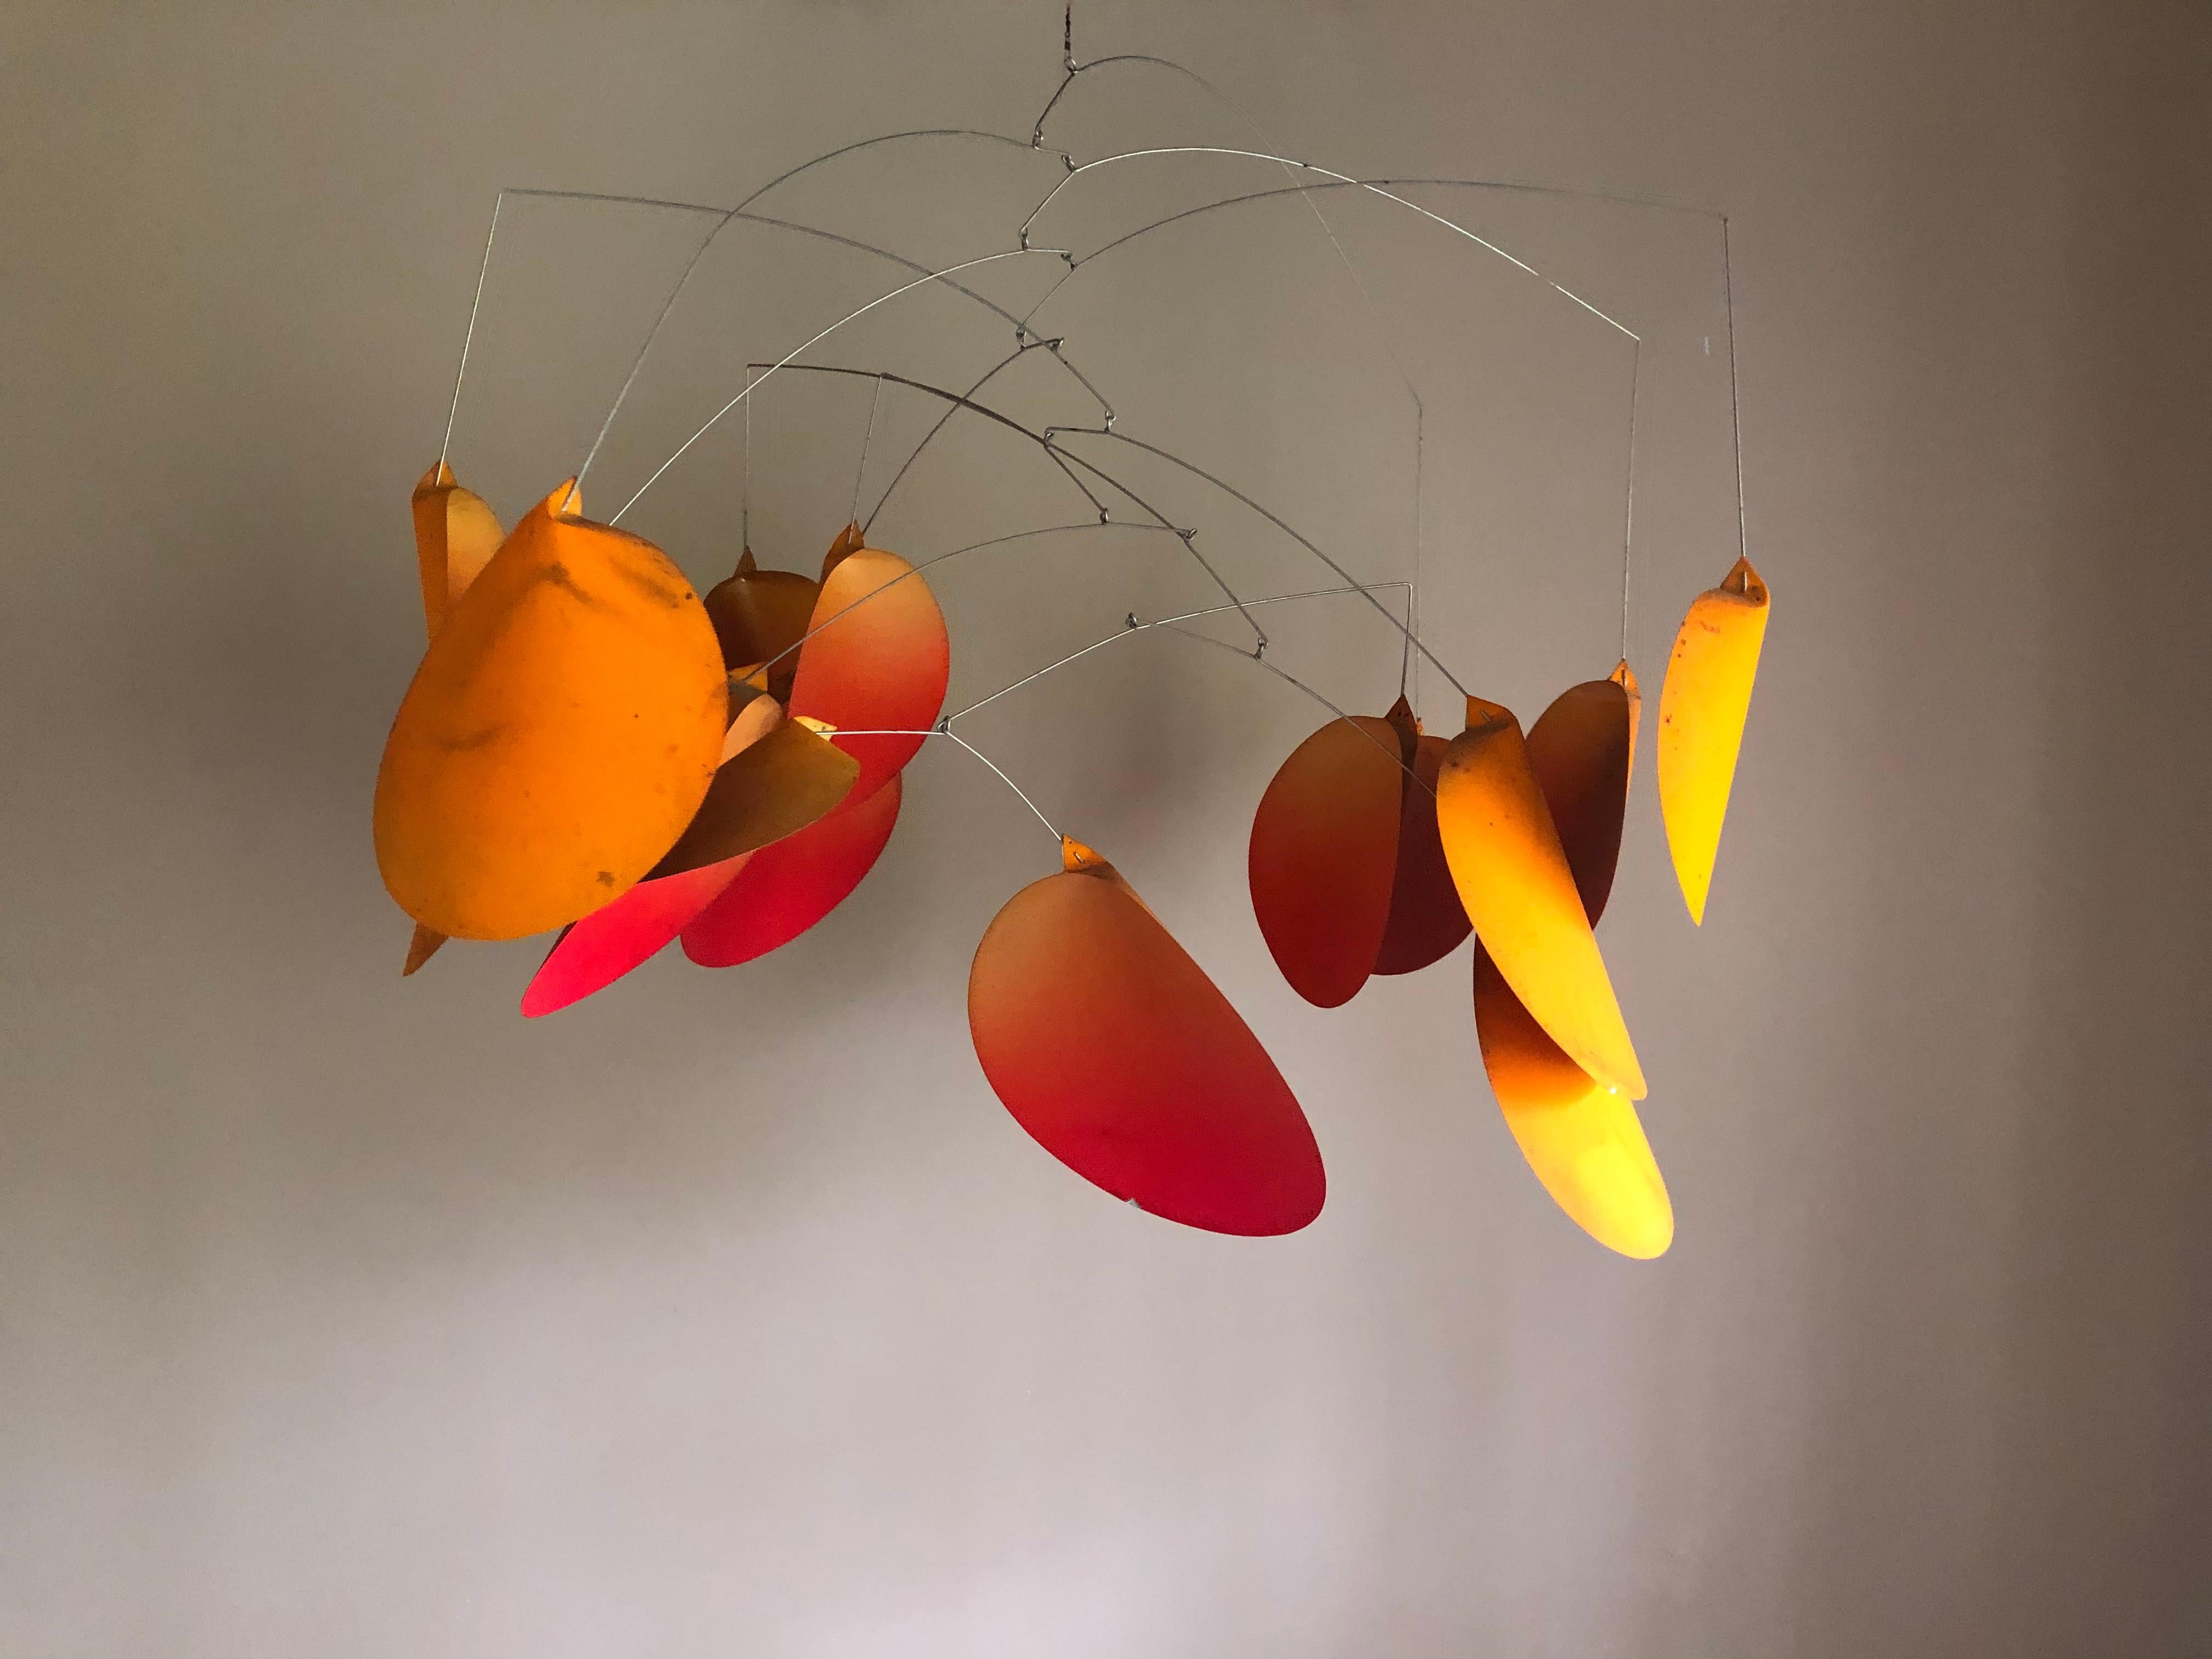 A cool tin and wire kinetic mobile hanging sculpture having individual discs where the orange paint turns red towards the bottom for added visual punch. Weighs about 2 lbs.